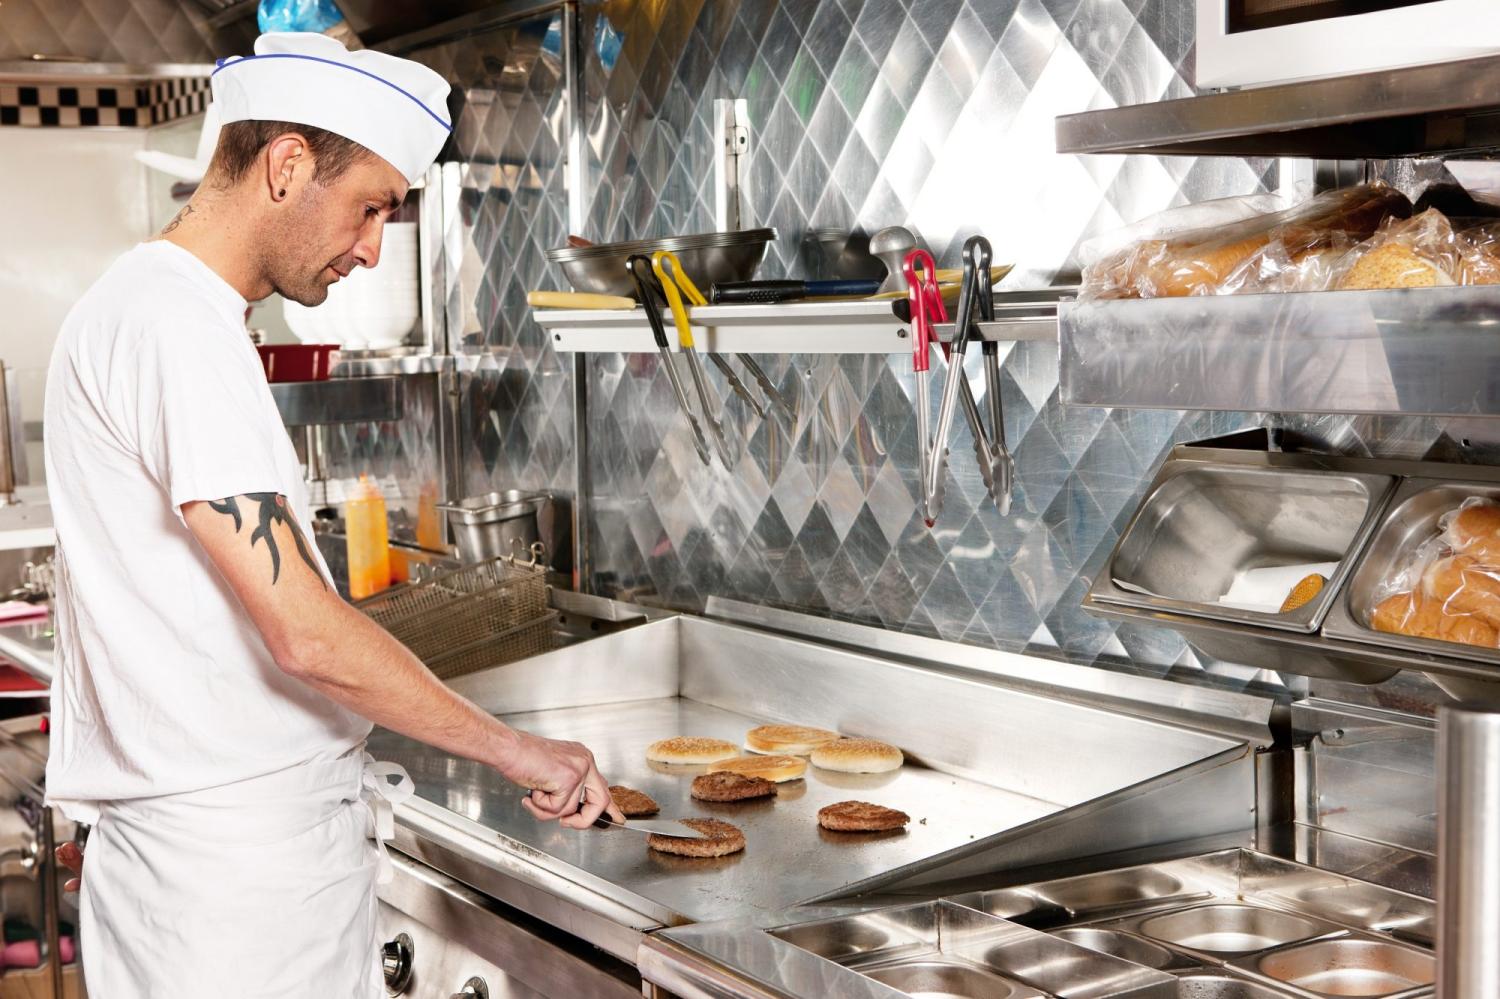 Fry cook cooking burgers in a commercial fast food restaurant kitchen